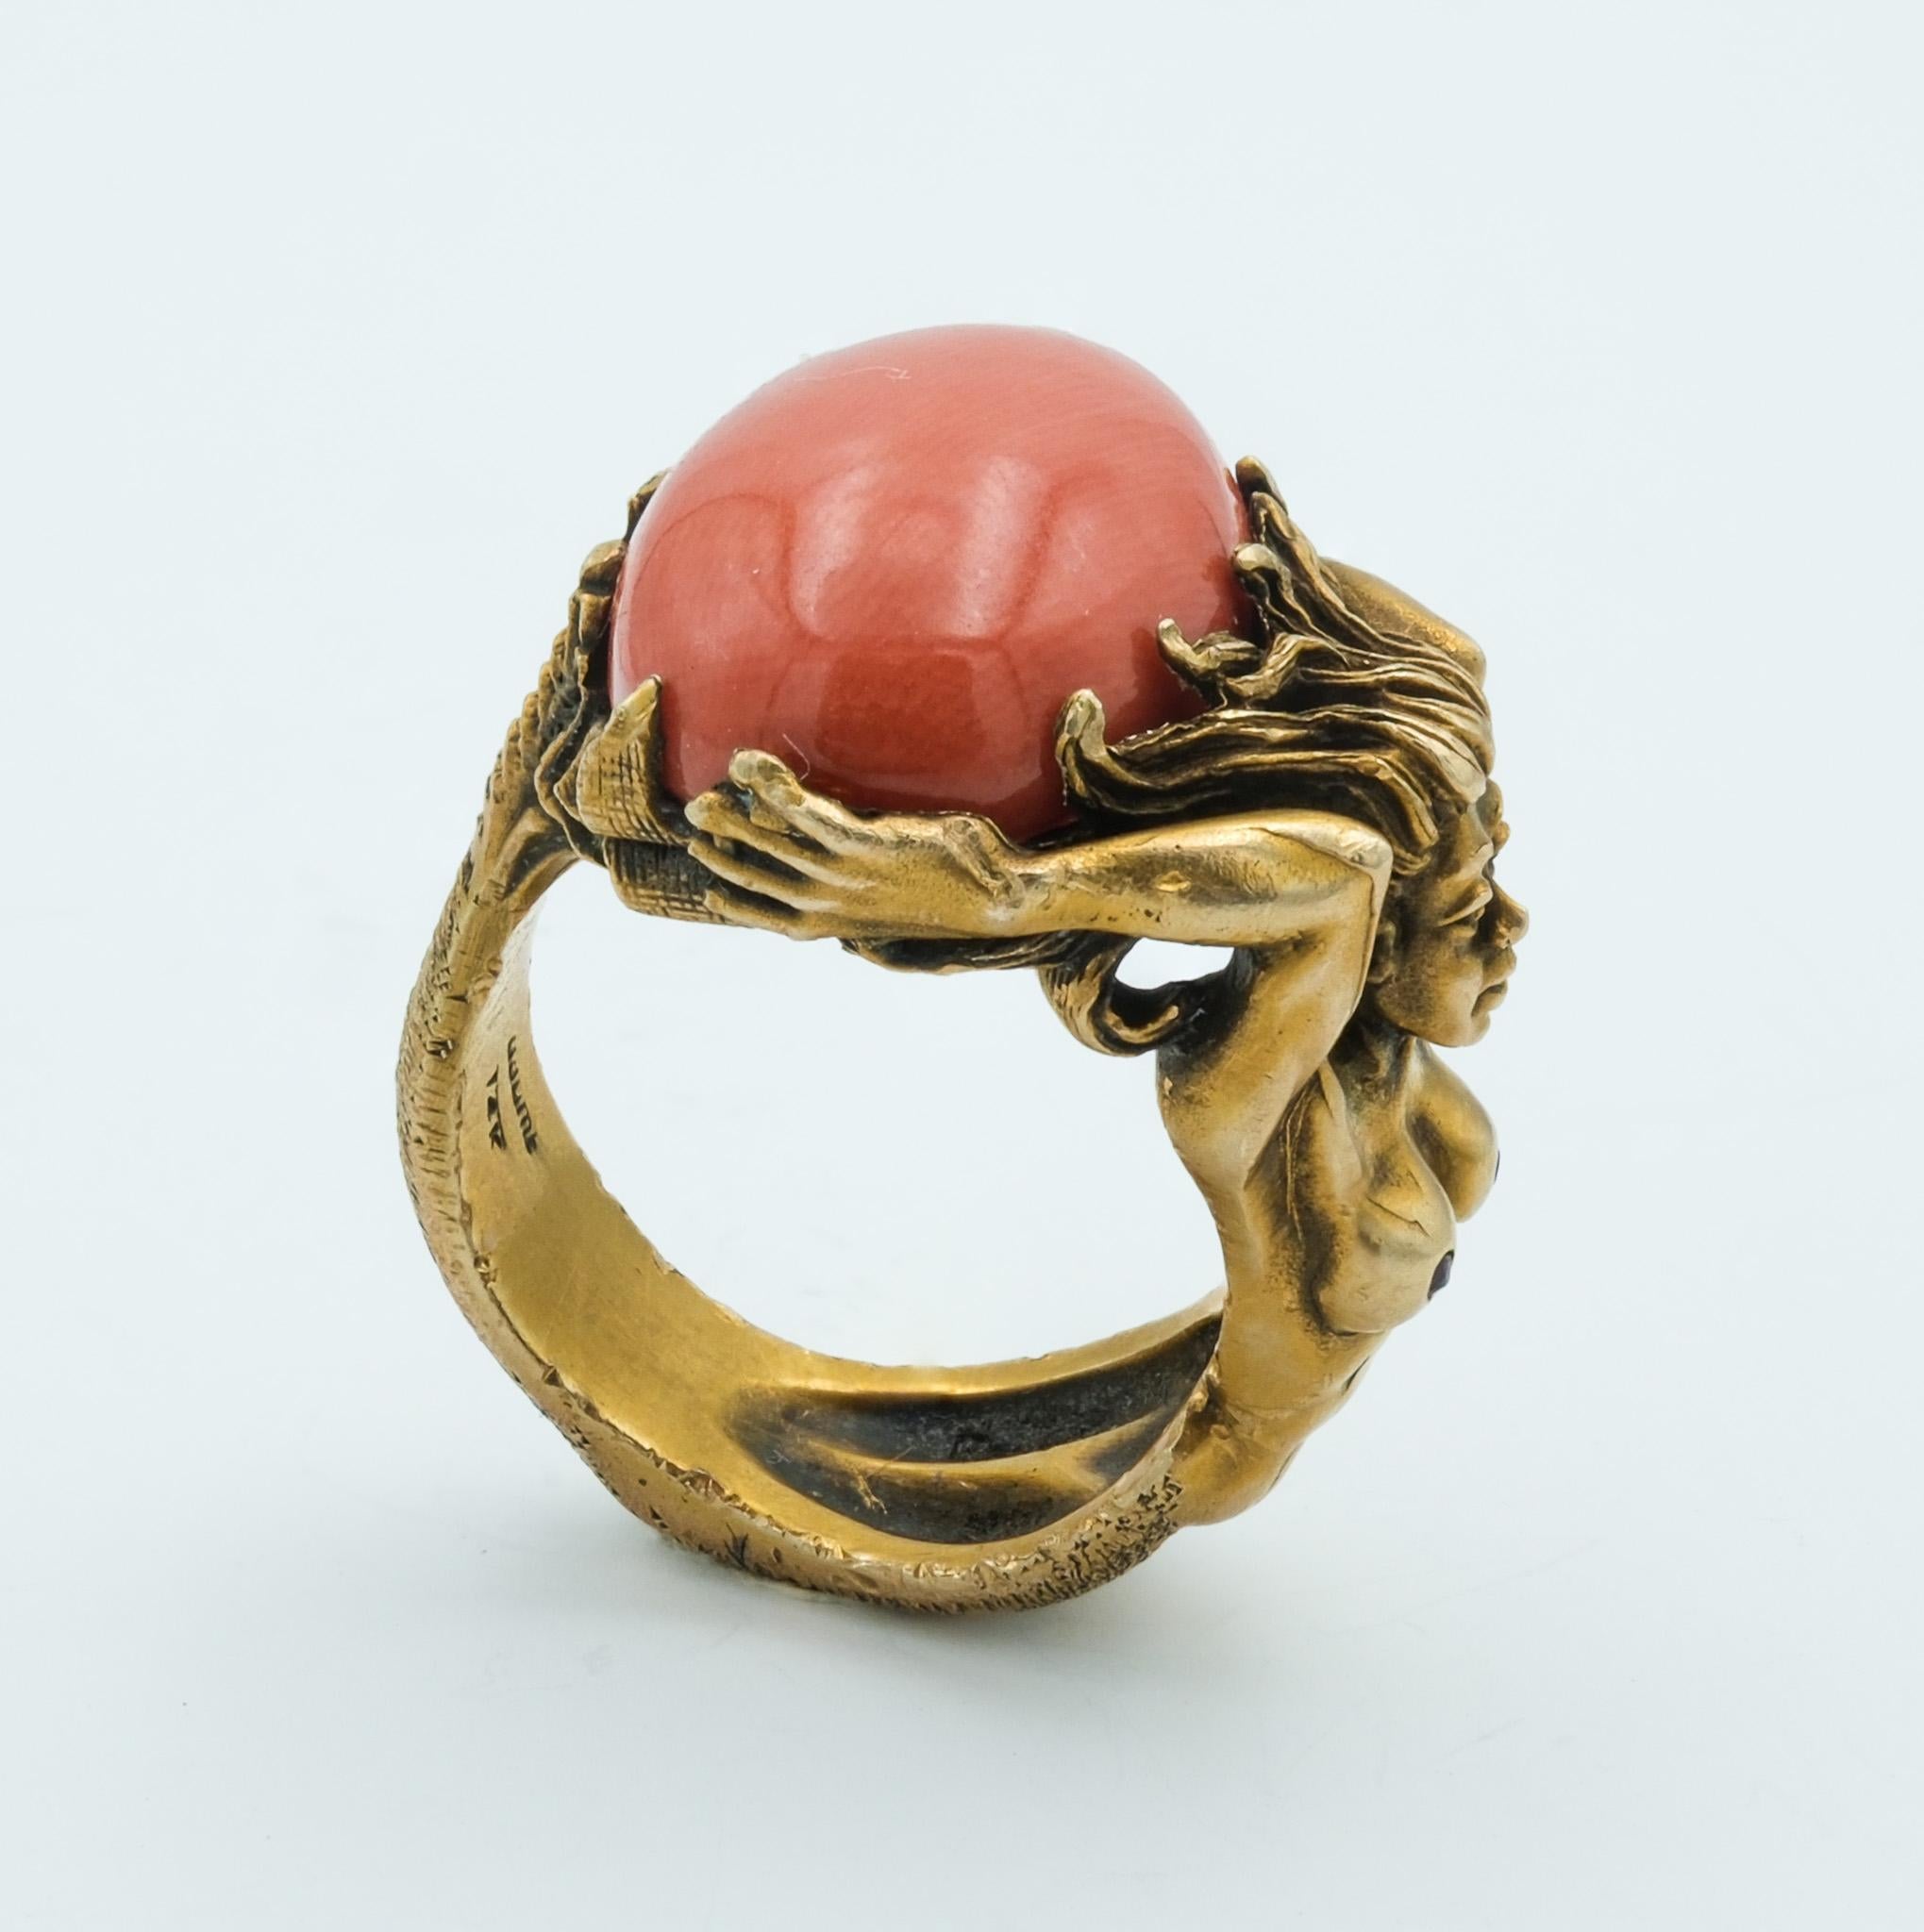 This exquisite piece is a unique ring that conjures the fluidity and grace of the natural world. Crafted from 14 karat yellow gold, it features a central coral gemstone, weighing approximately 12.8 carats. The coral's deep, warm hue is framed by a